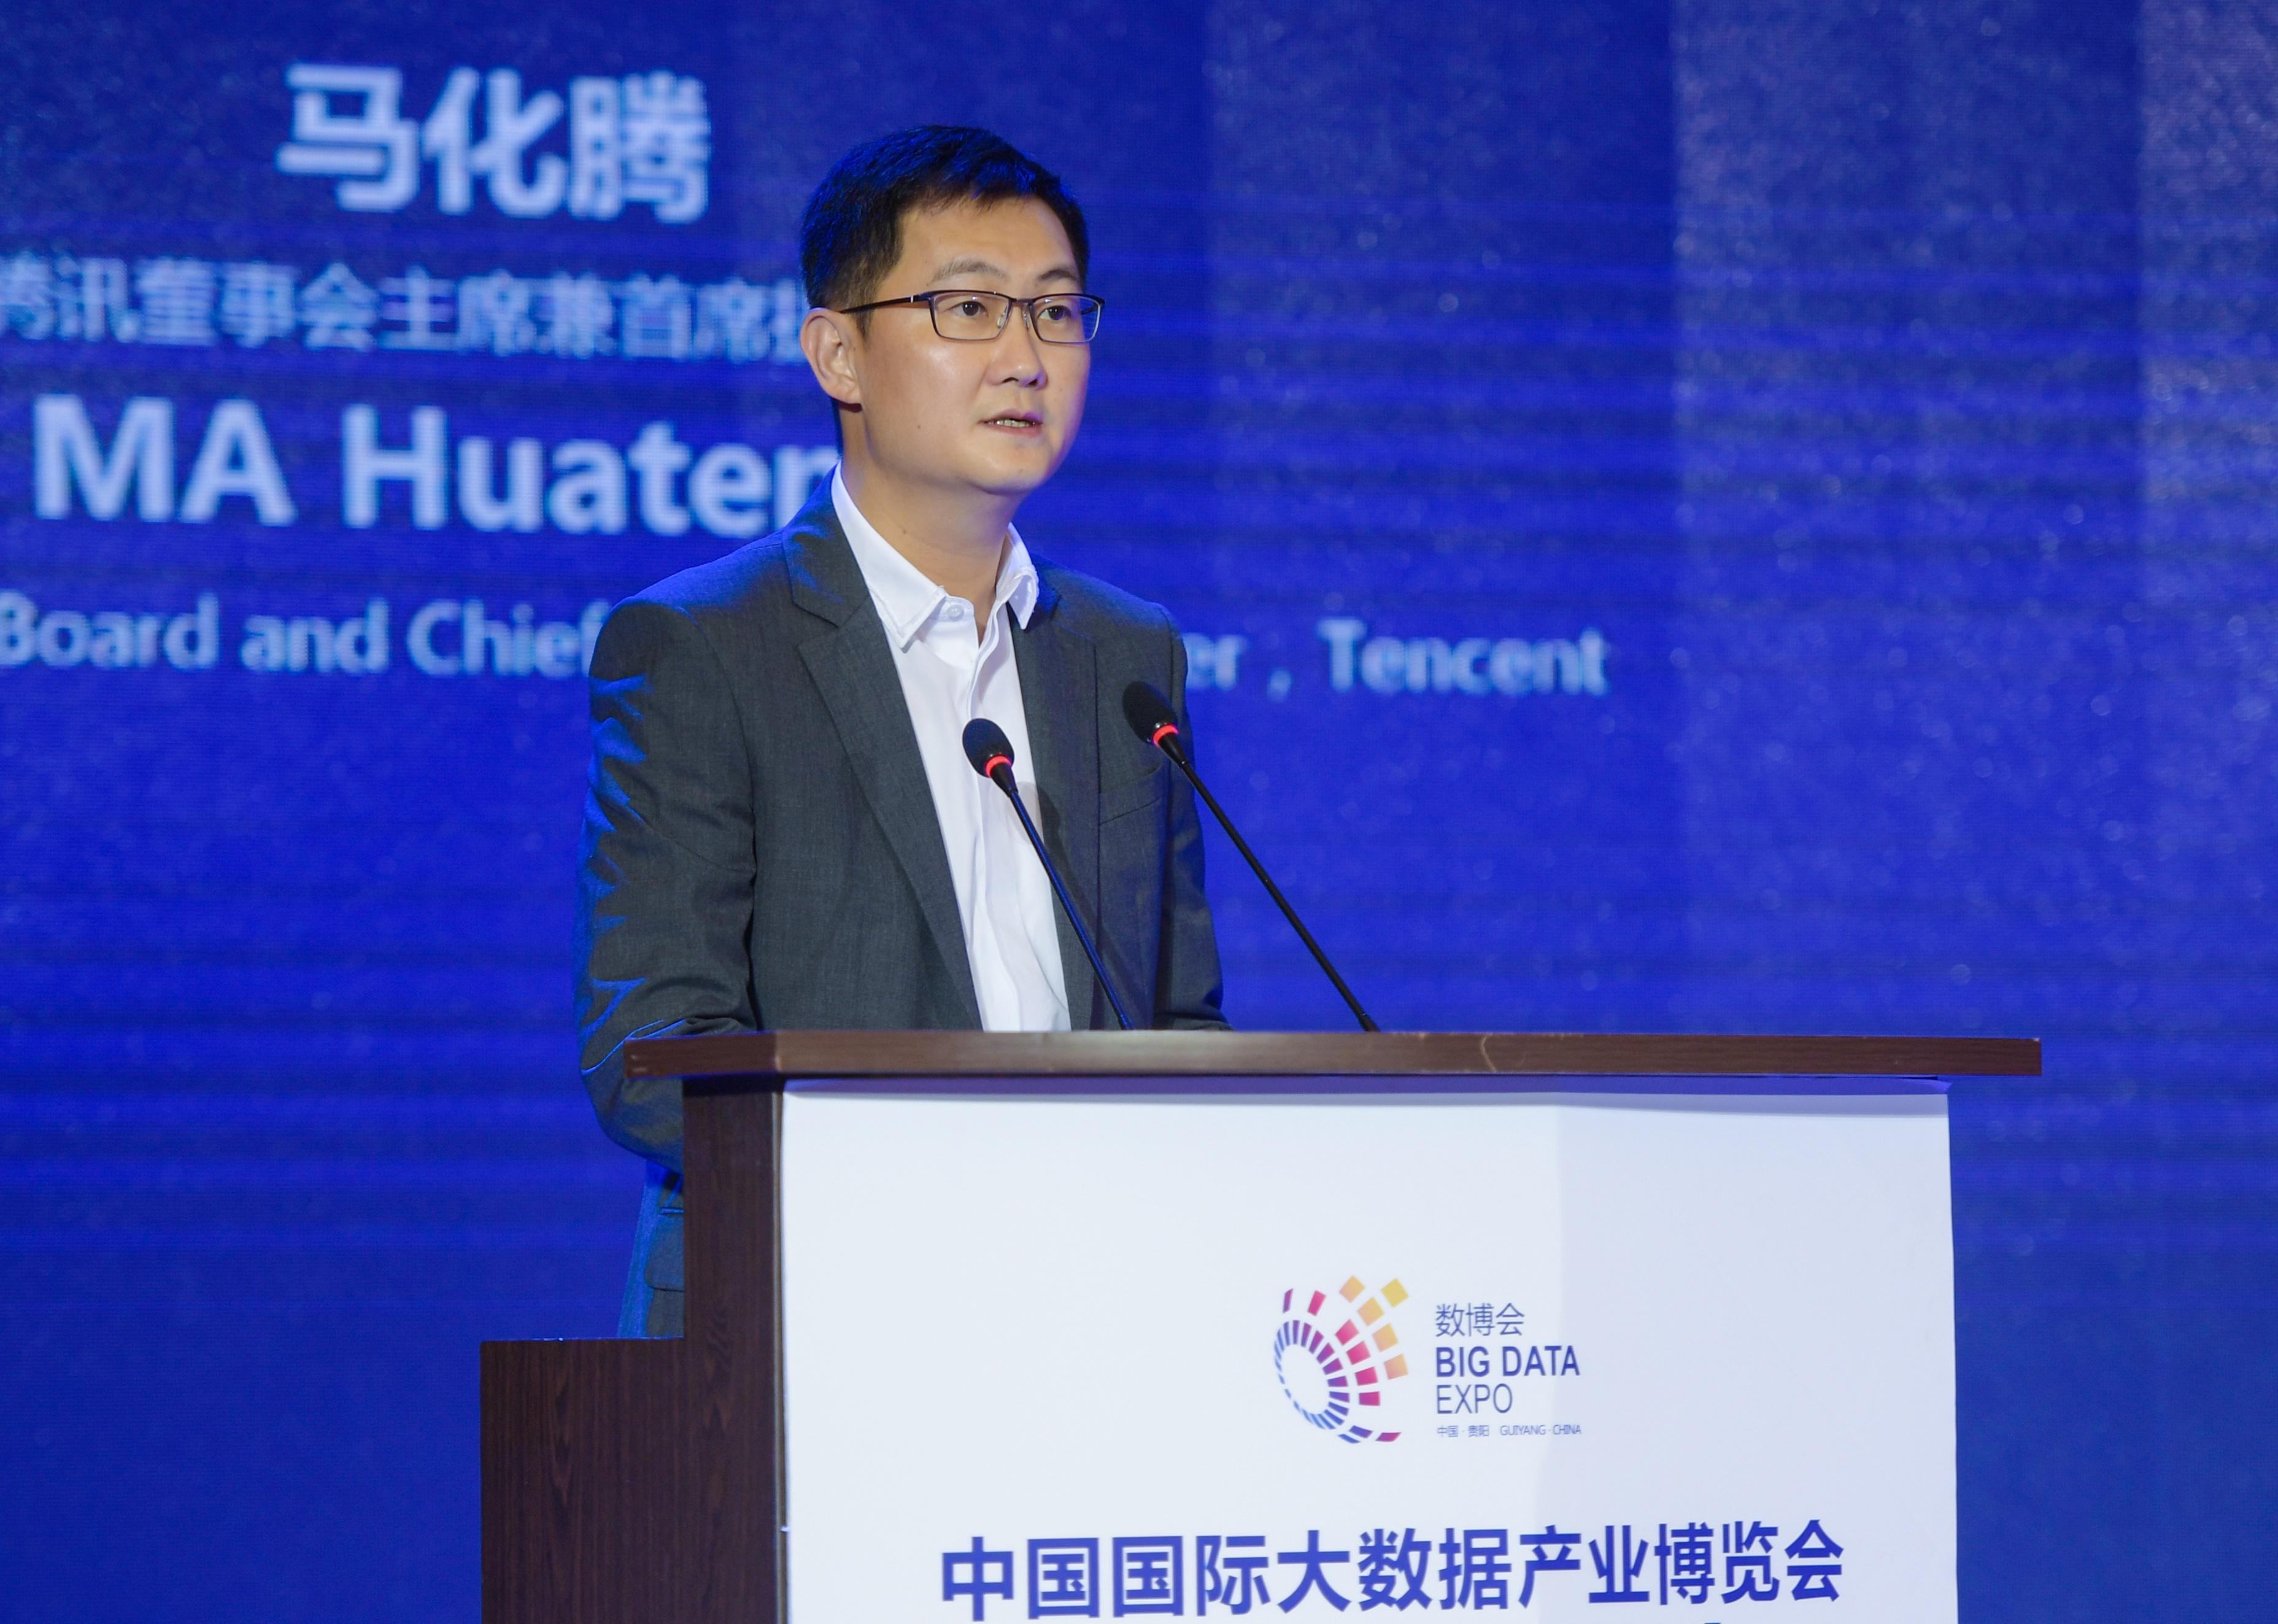 Ma Huateng speaks at event.